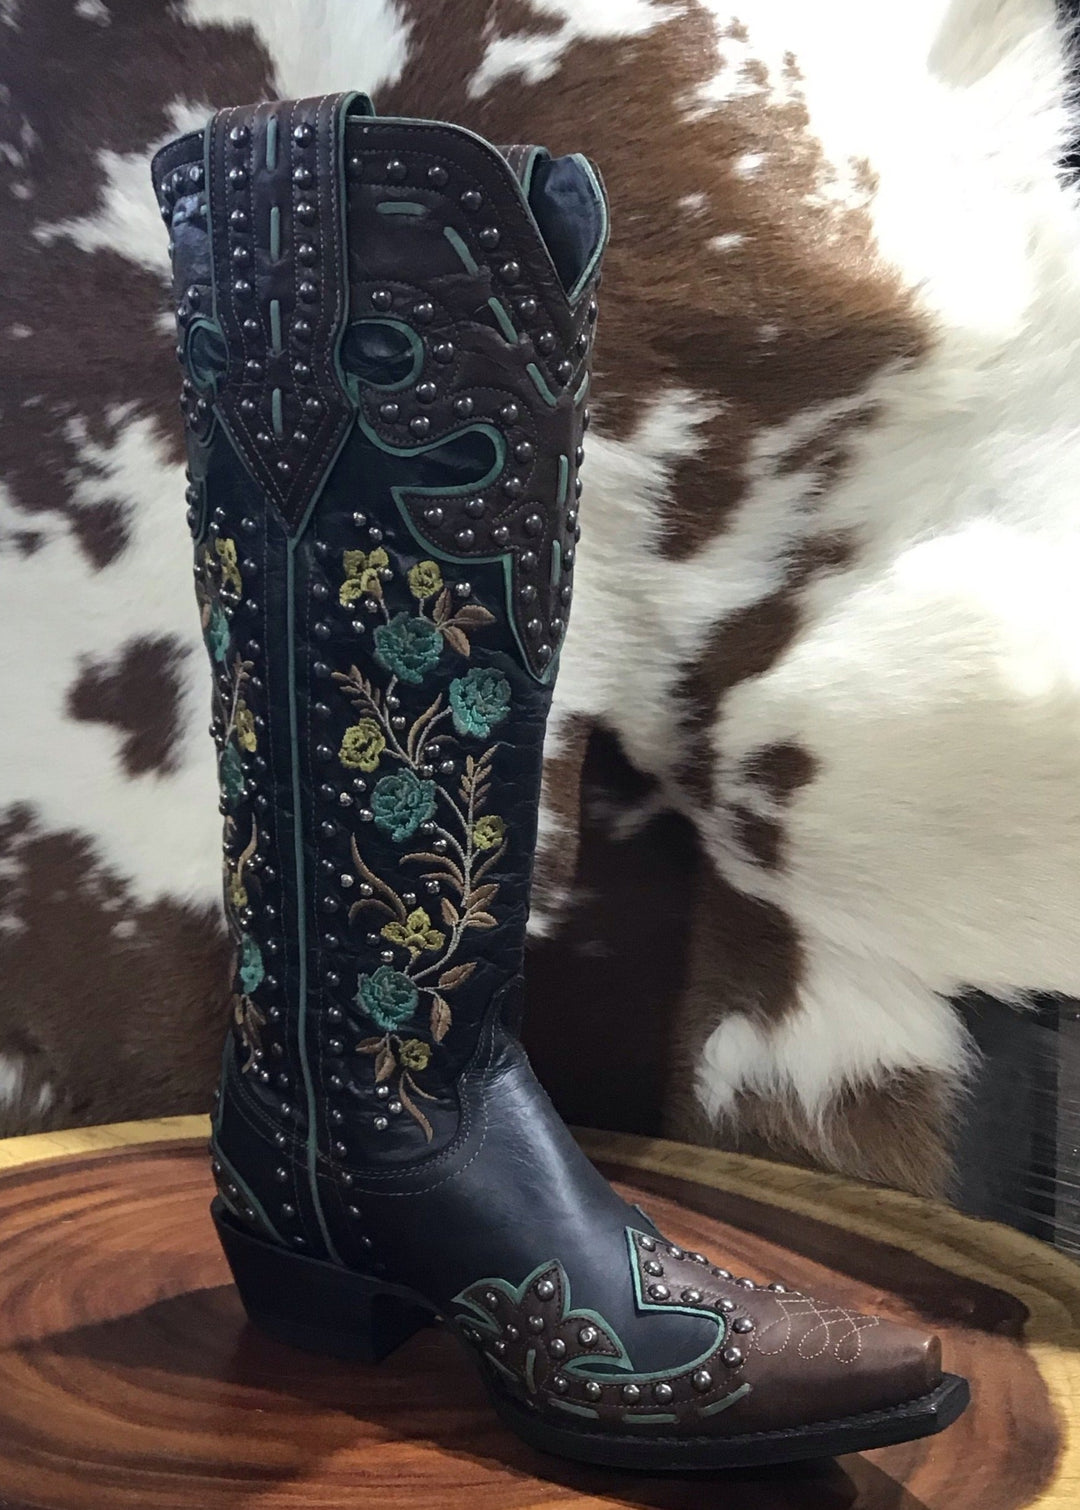 OLD GRINGO DOUBLE D RANCH "ROUND UP ROSIE" BOOTS *SALE*